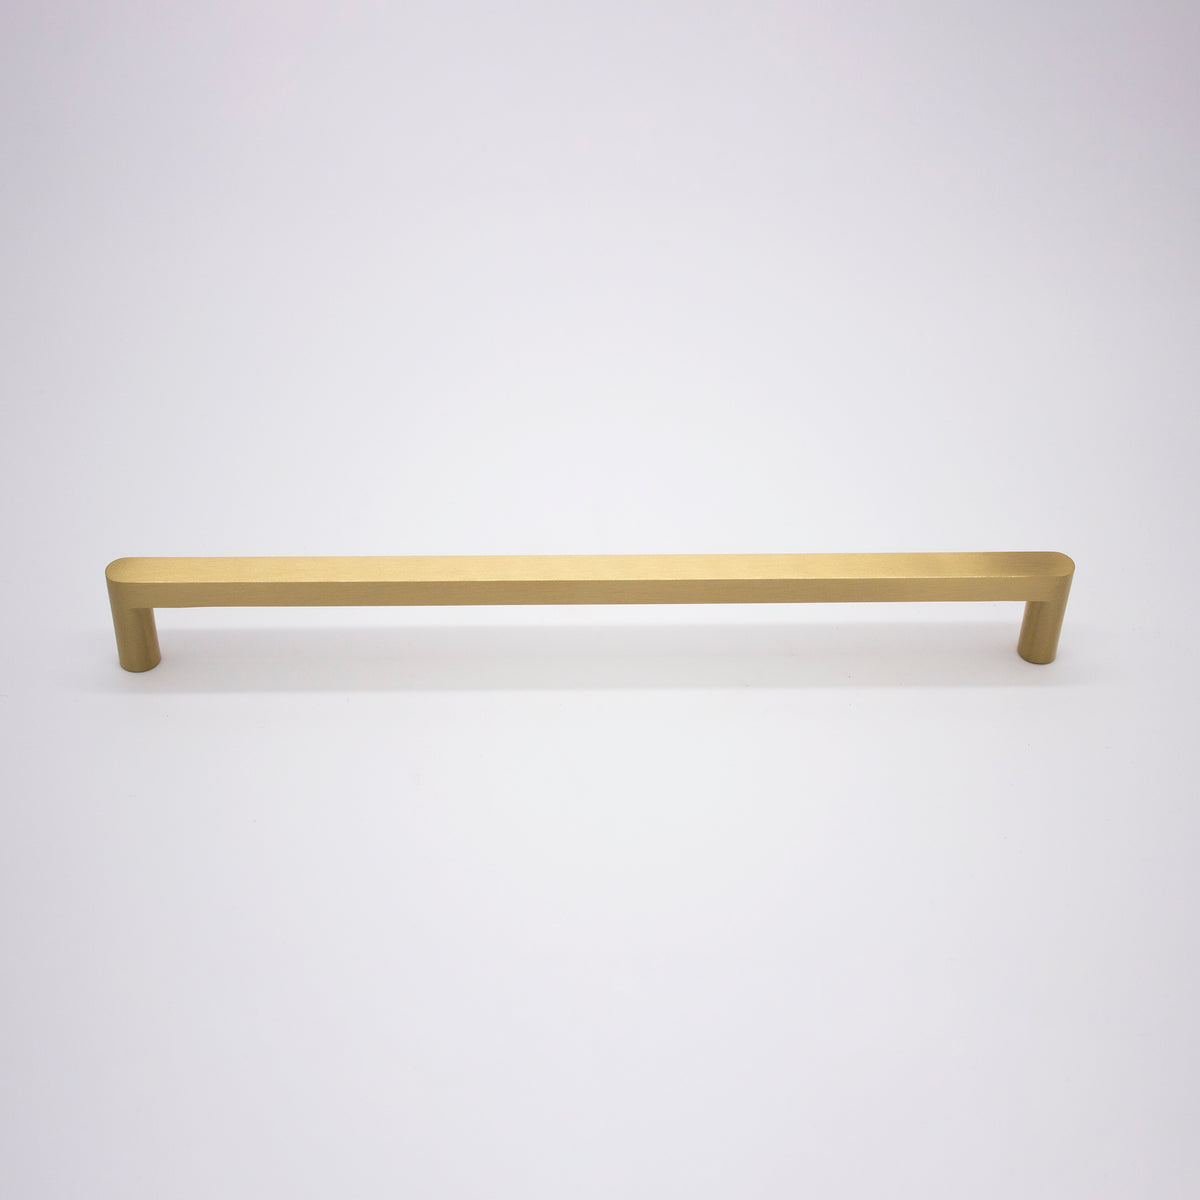 Brushed Brass Straight Profile Cabinet Pull - Clio